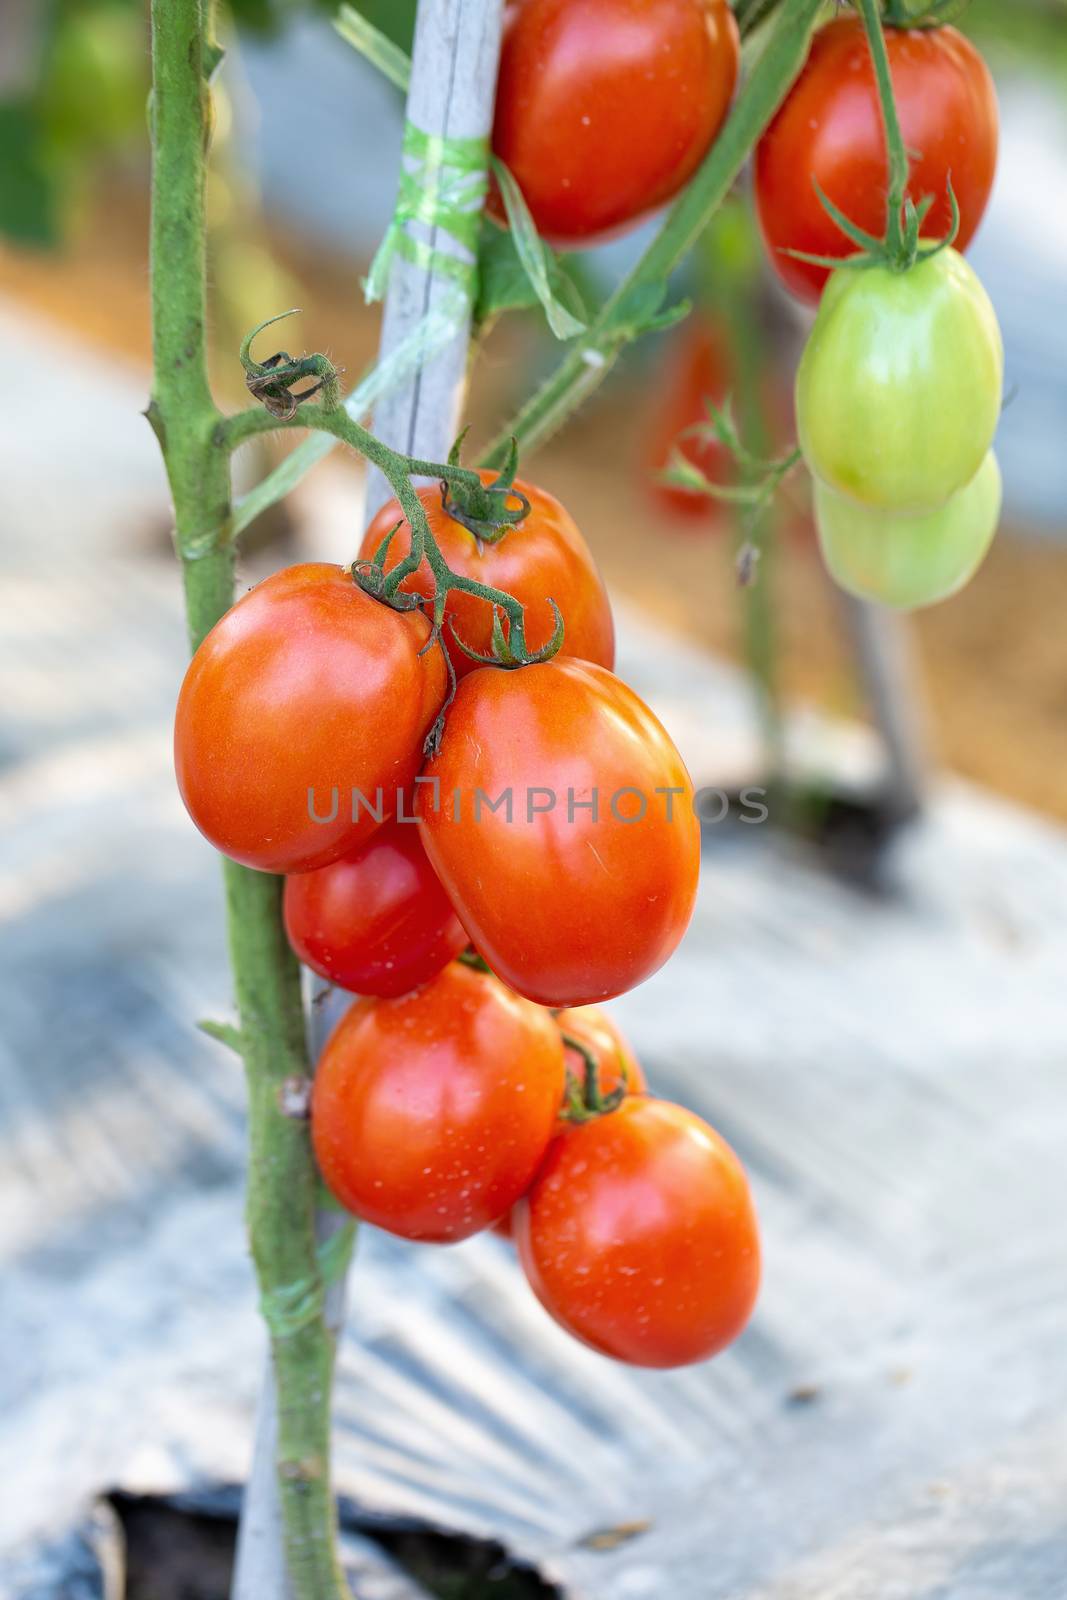 Ripe red tomatoes are hanging on the tomato tree in the garden by kaiskynet